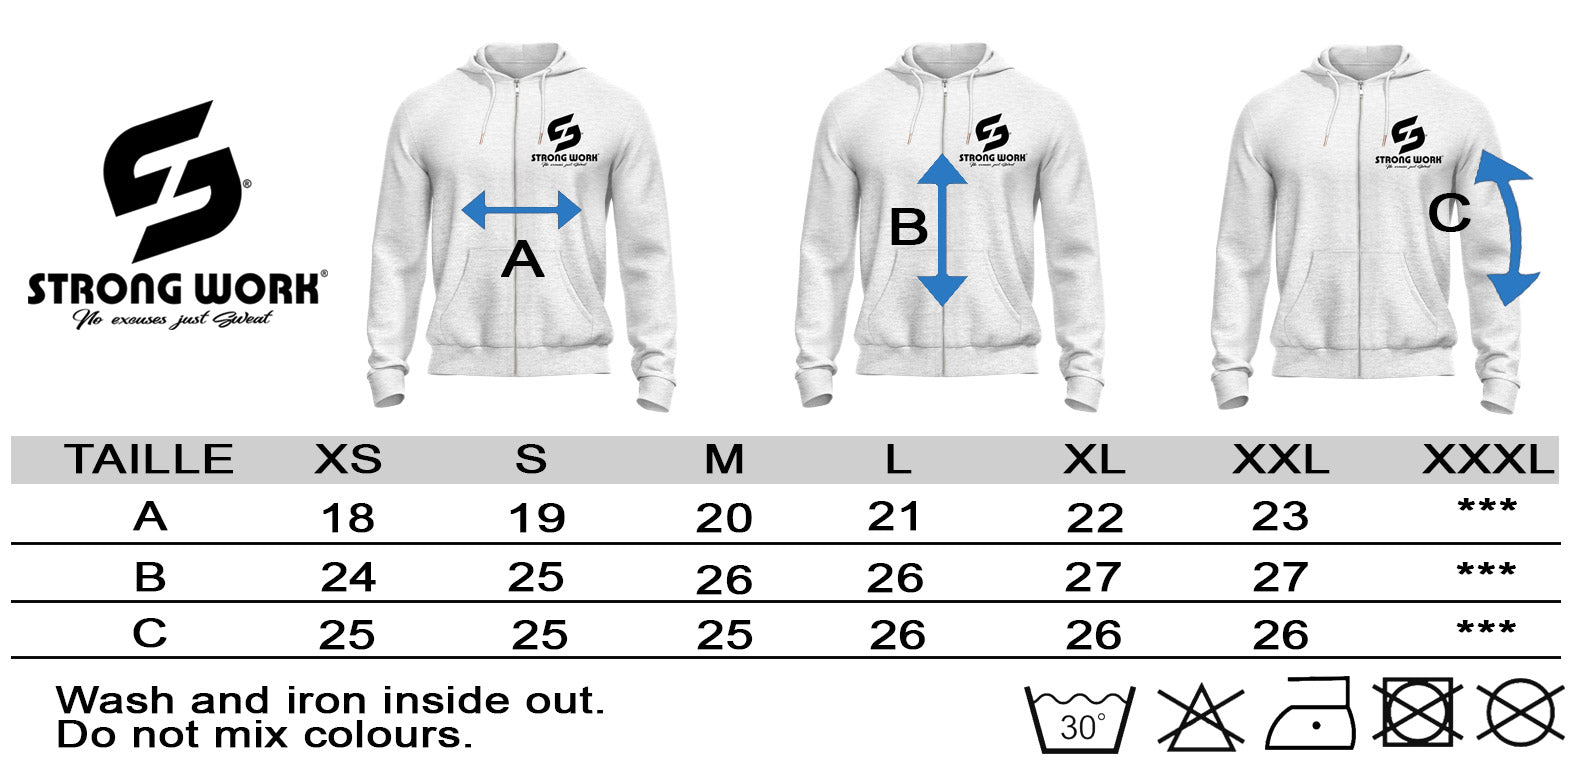 STRONG WORK CLASSIC ZIPPED HOODED SWEATSHIRT FOR WOMEN - SIZE GUIDE